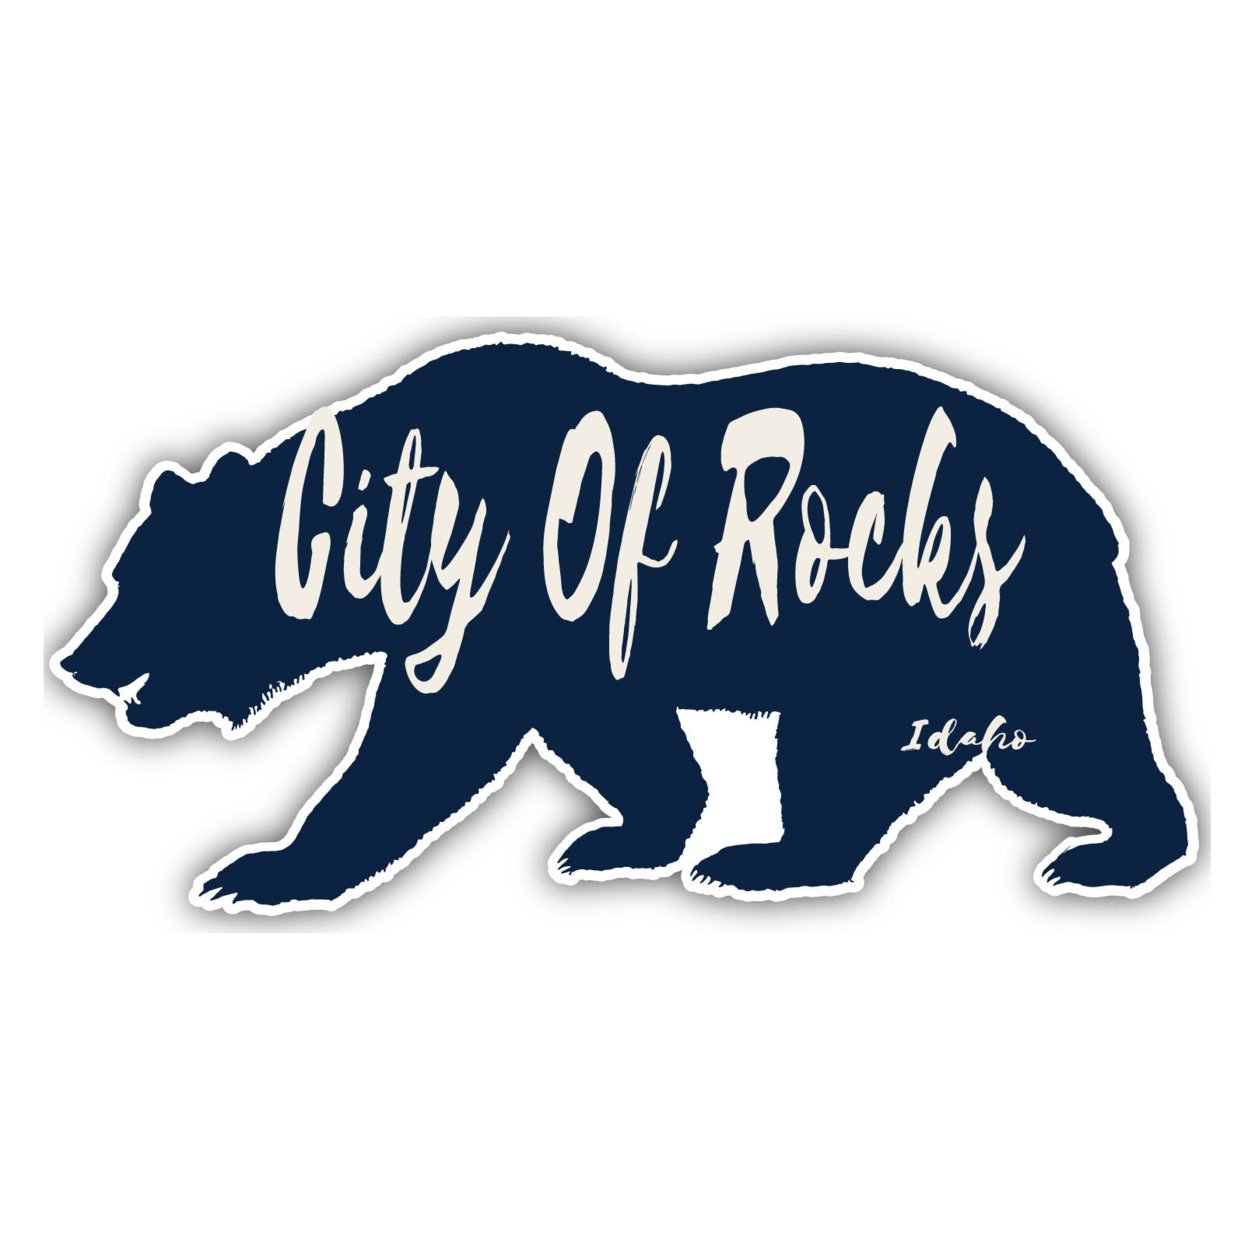 City Of Rocks Idaho Souvenir Decorative Stickers (Choose Theme And Size) - 4-Pack, 12-Inch, Bear